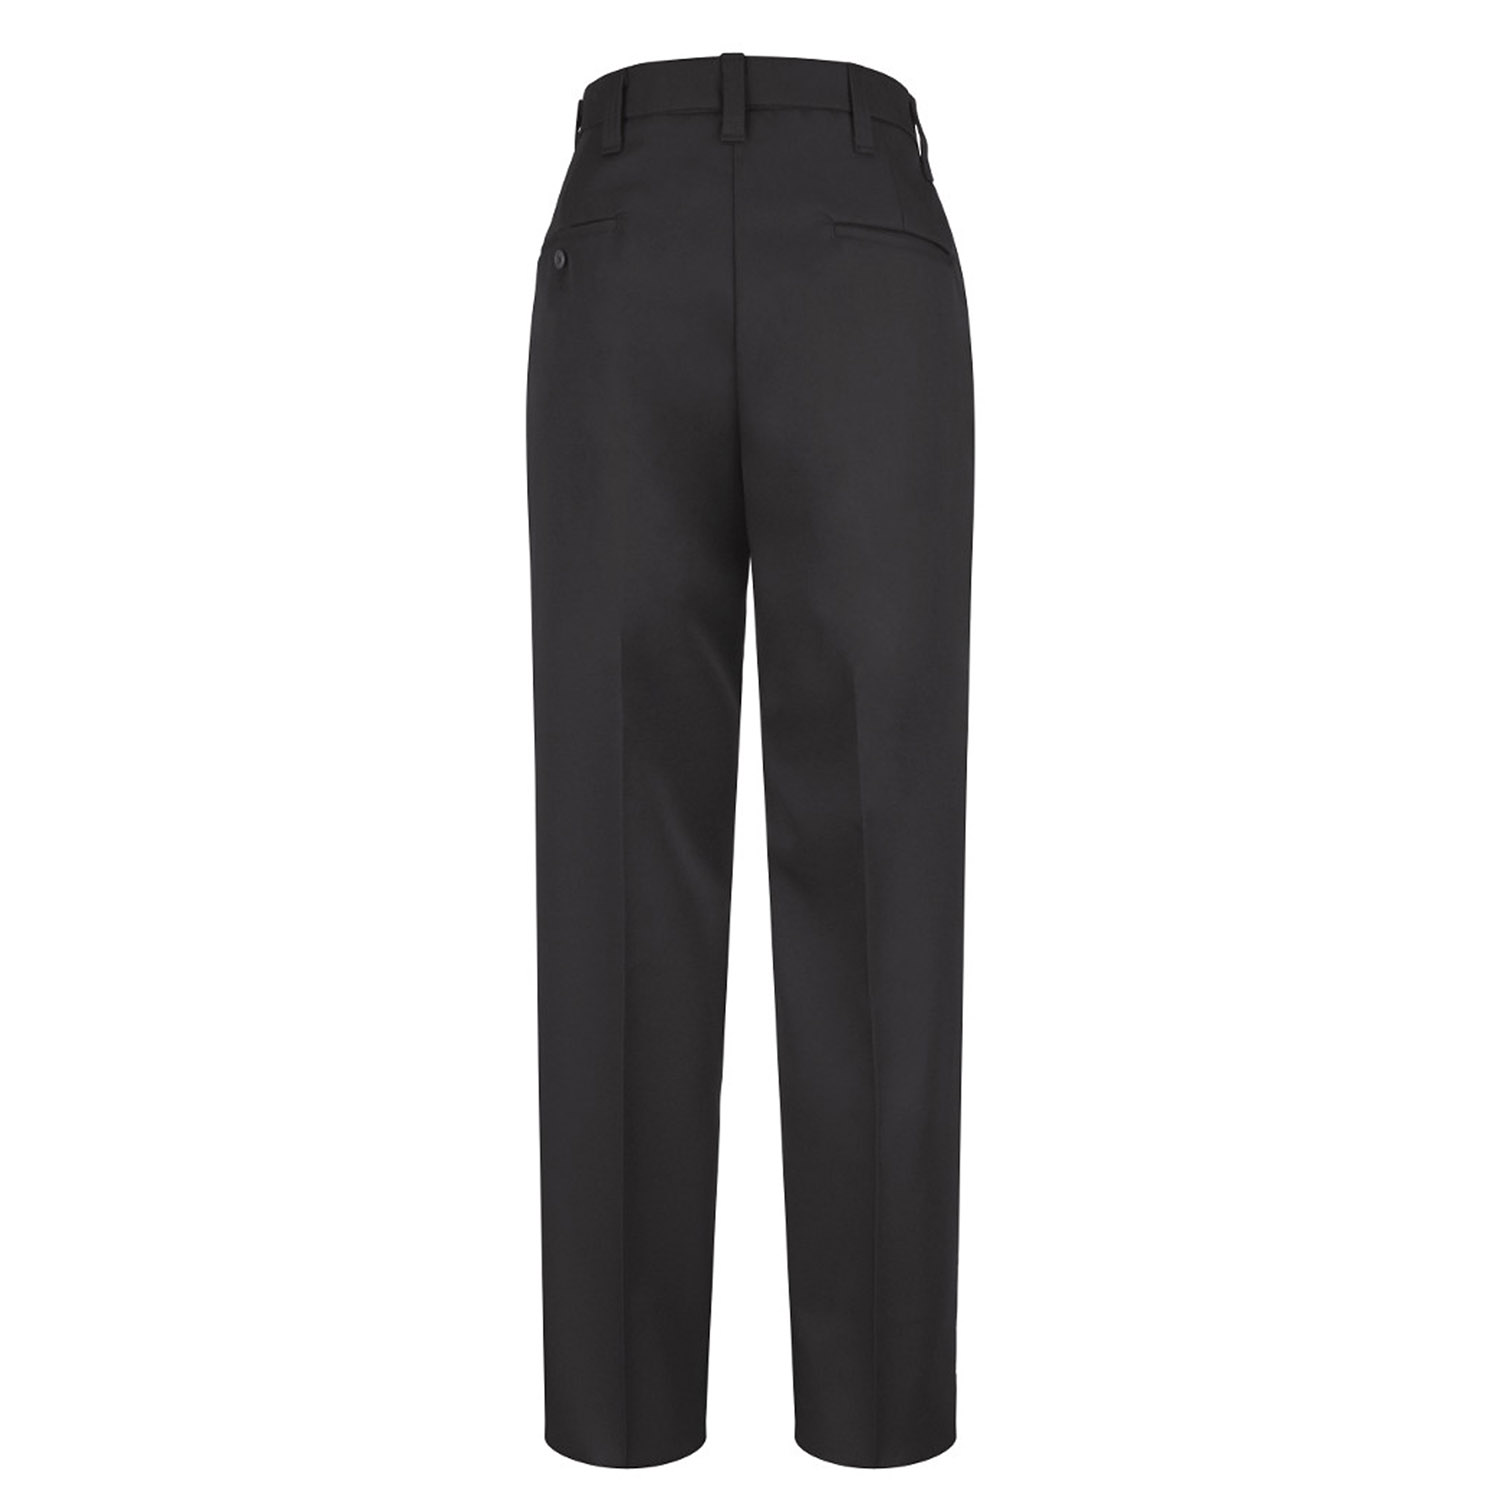 Horace Small Women's Sentinel Security Pants